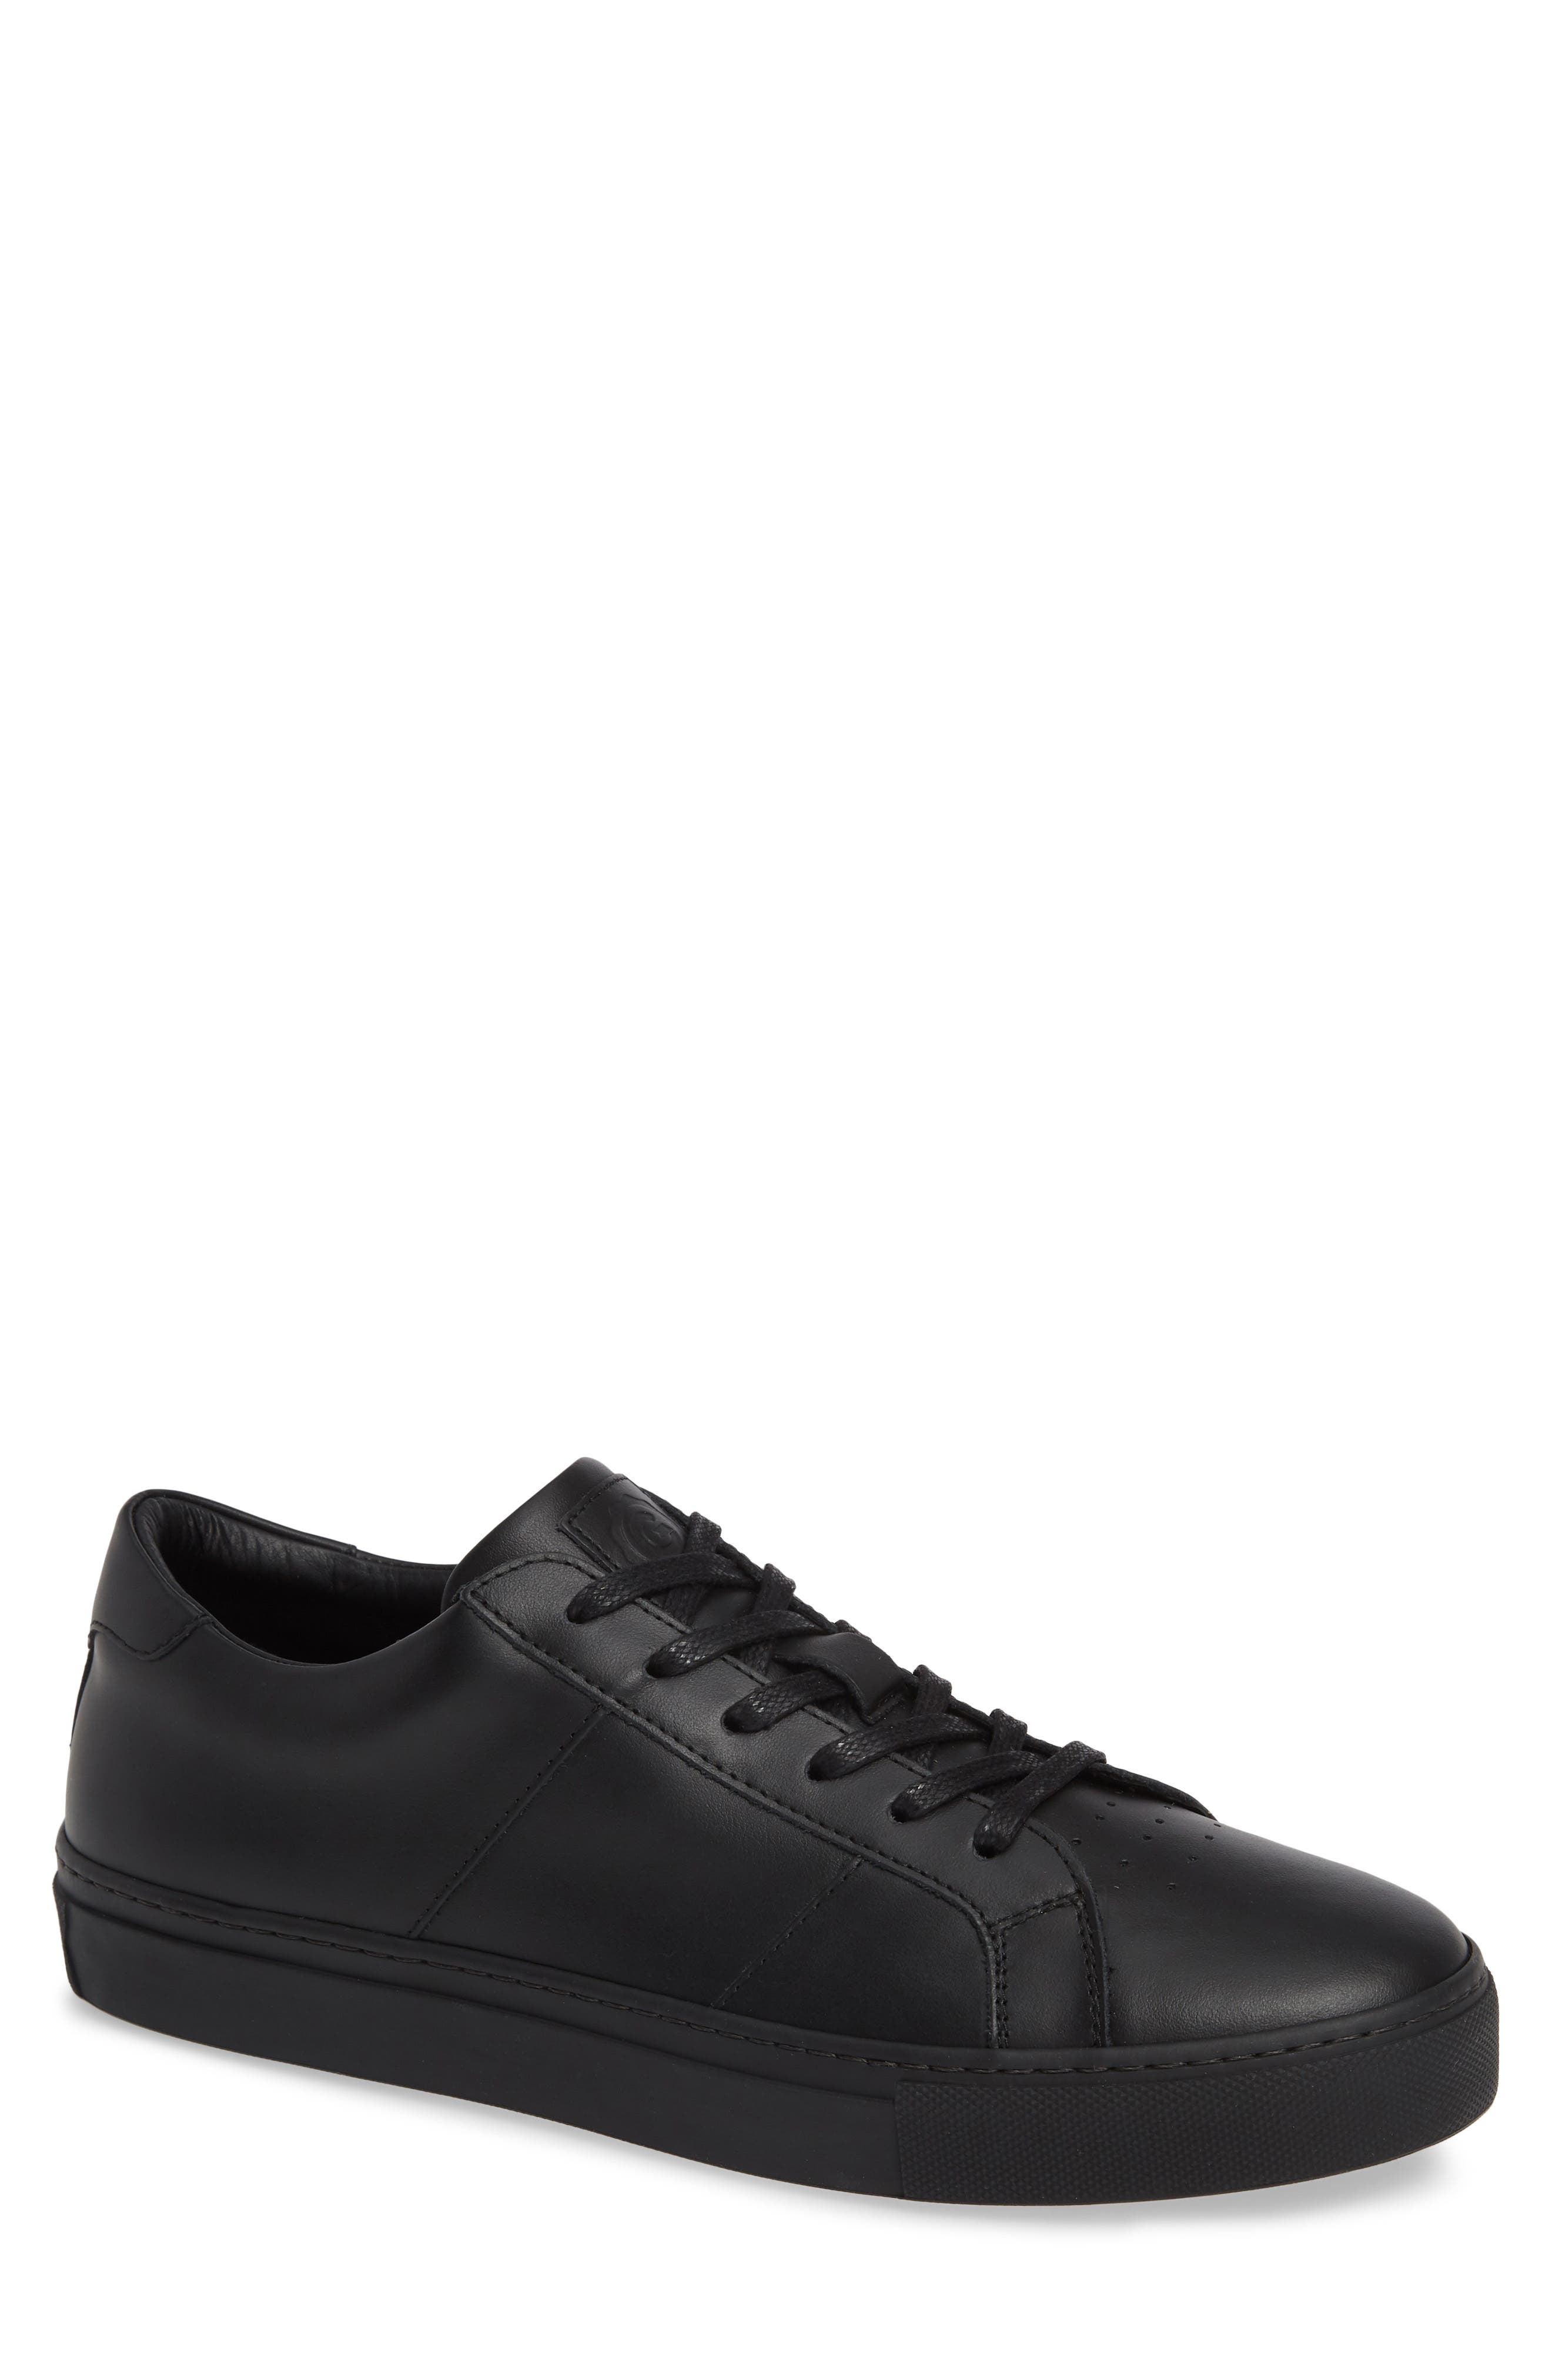 all black casual sneakers